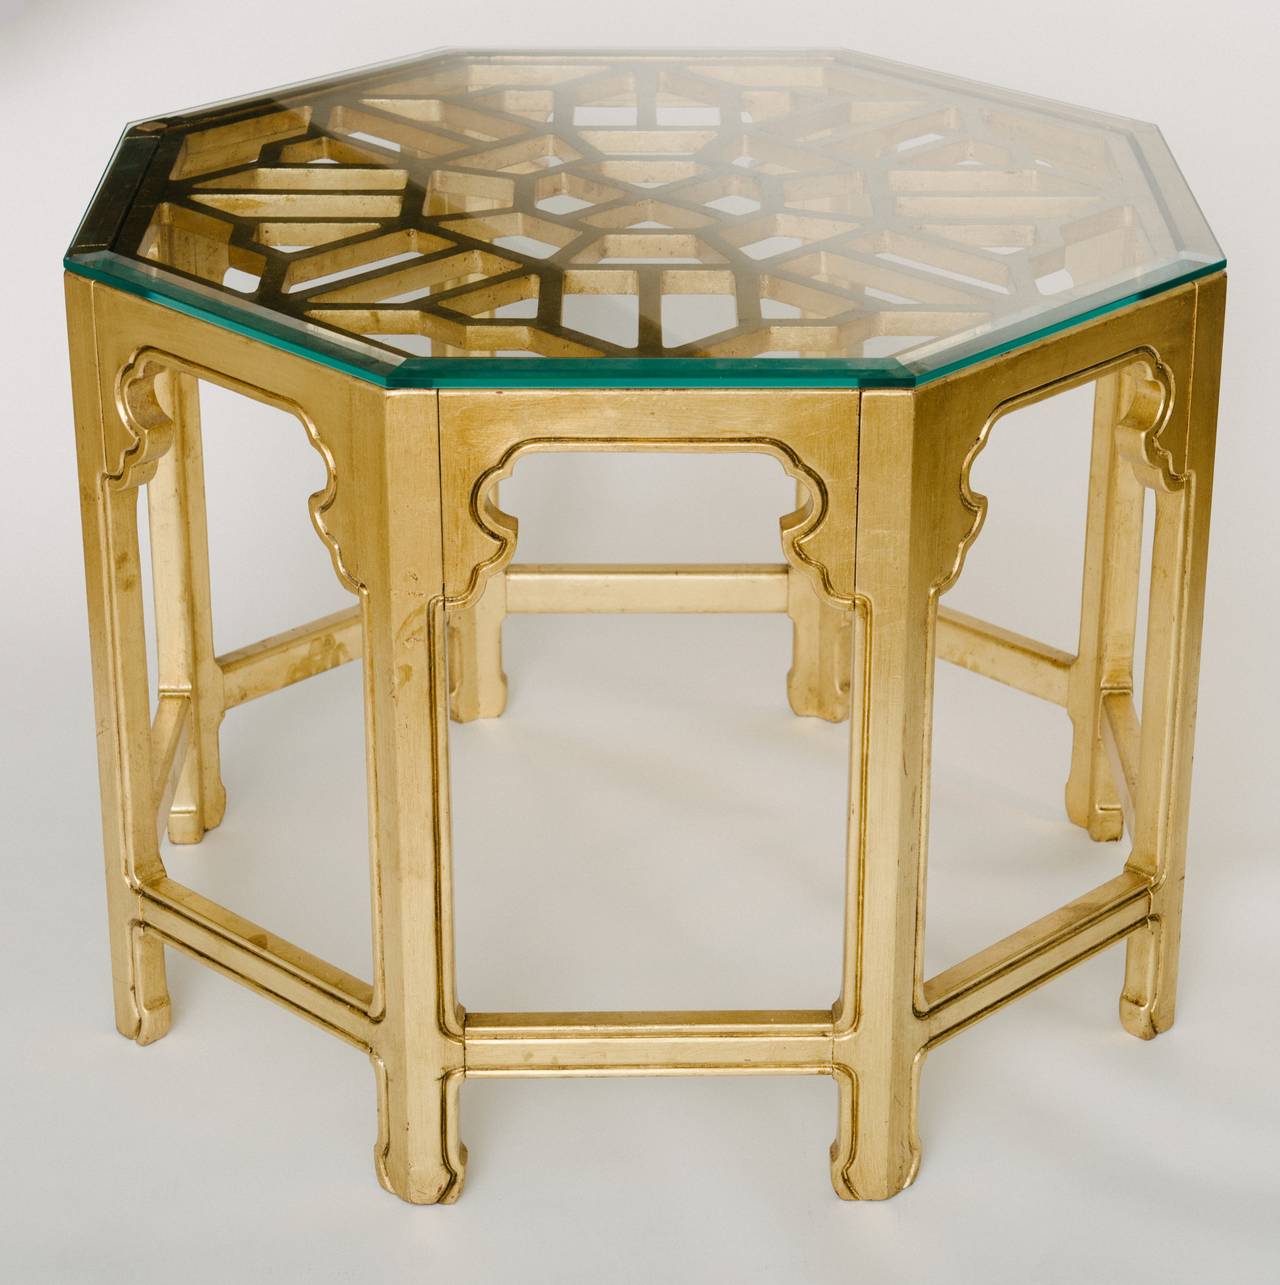 20th Century Vintage Giltwood Octagonal Center Table